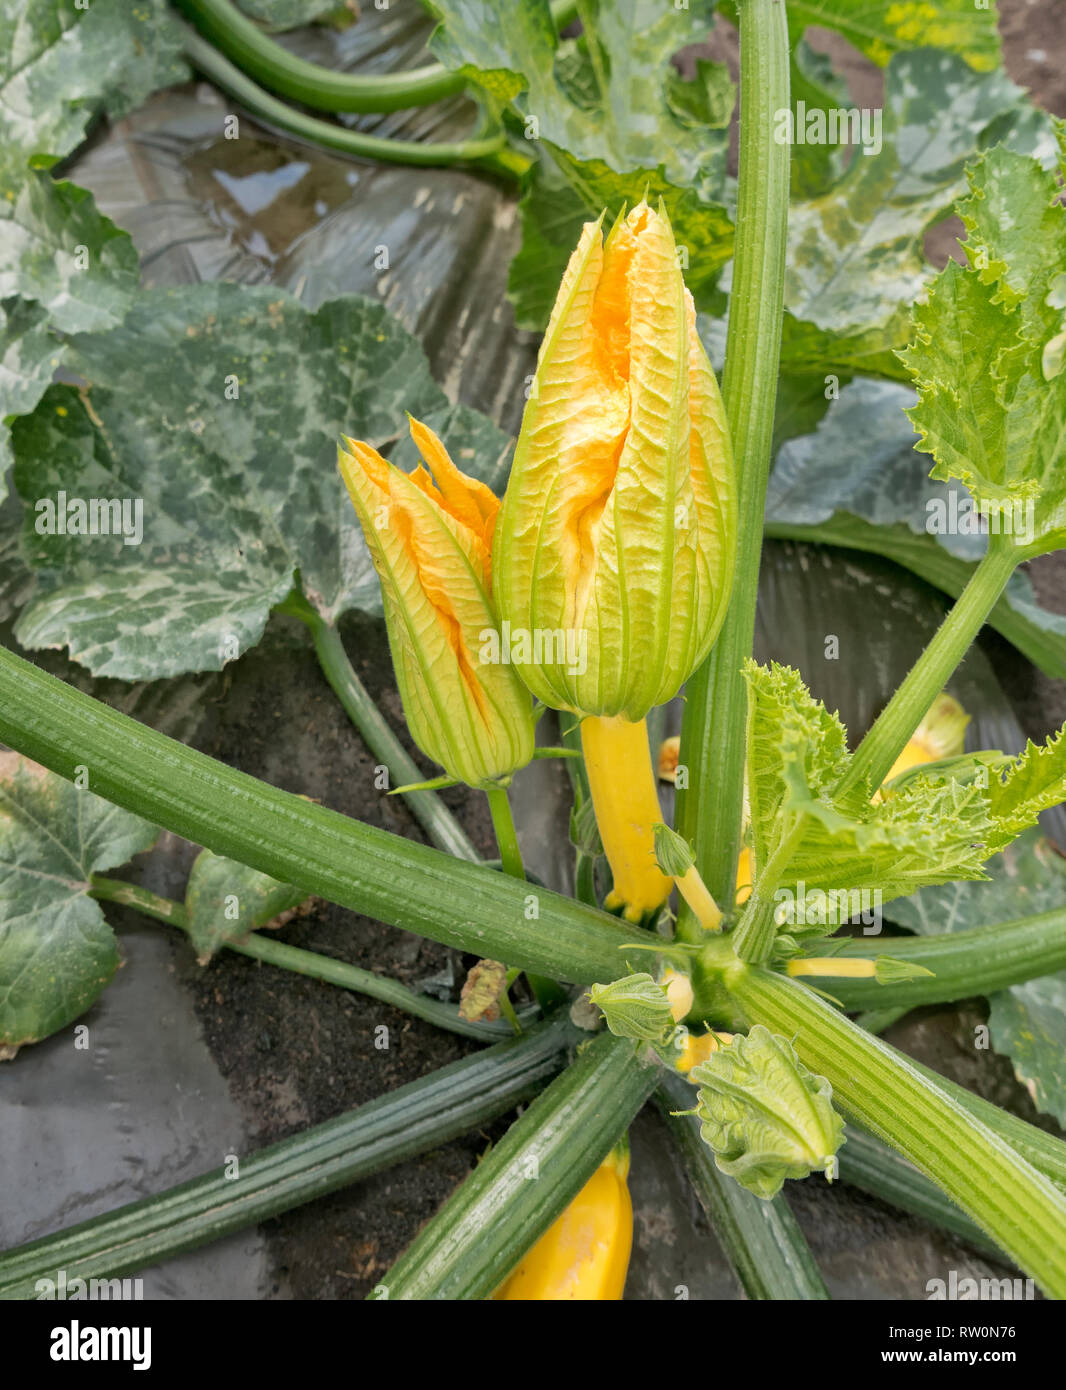 Zucchini 'Cucurbita pepo' plant, set fruit, female & male flowers on the same plant, growing in field planting. Stock Photo